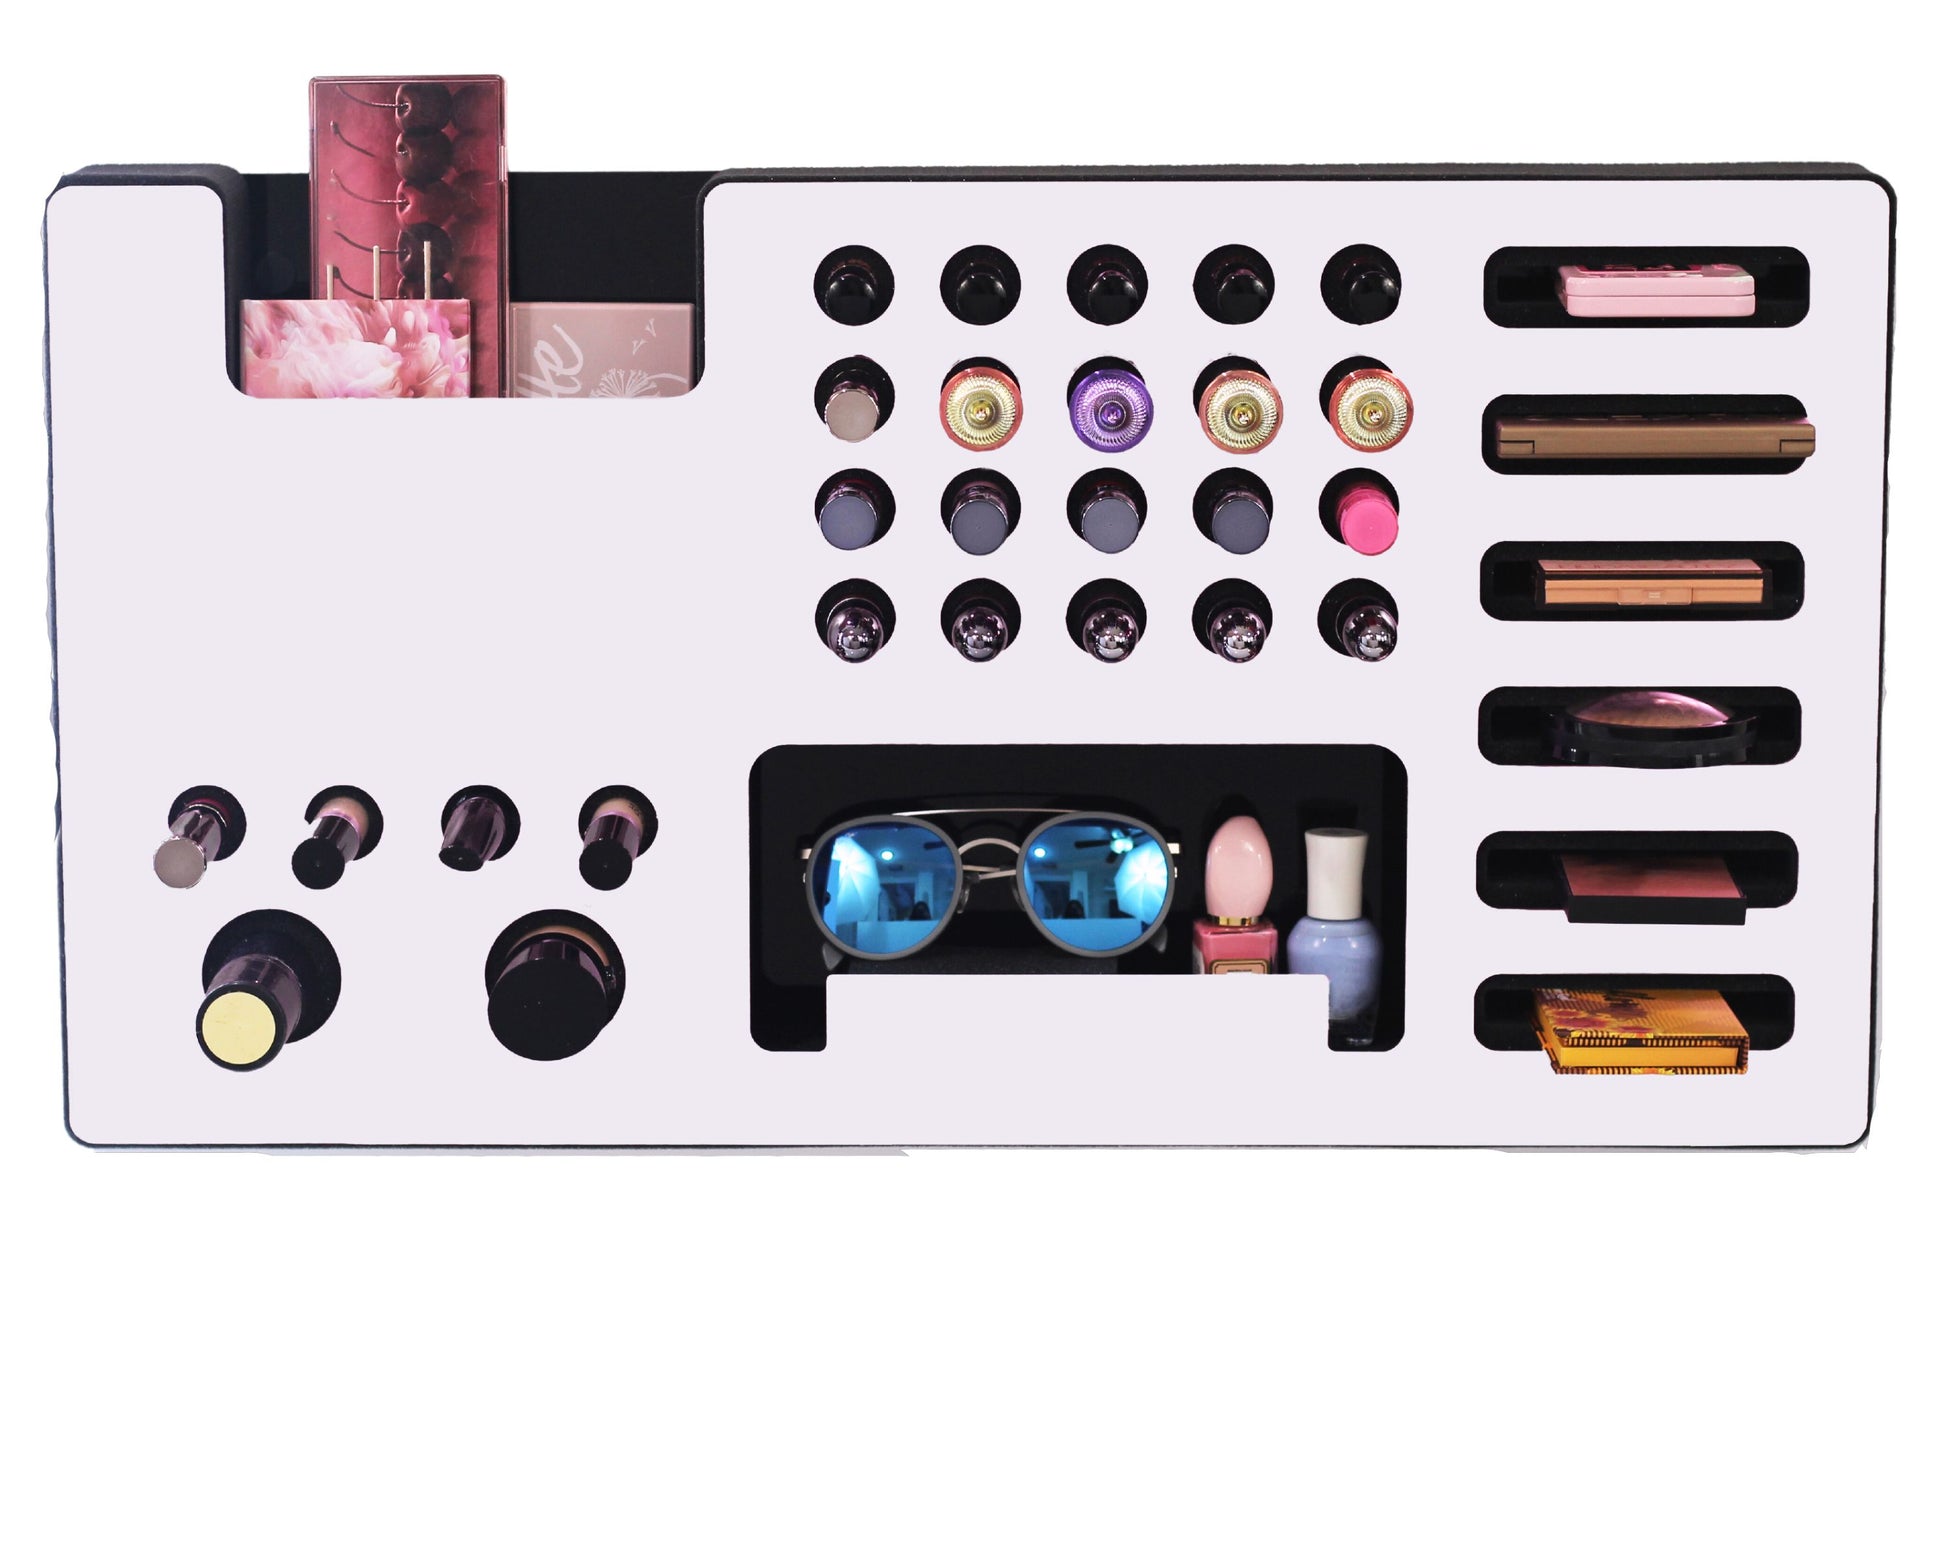 White Ultra Complete Makeup Solution Organizer shown mounted on the wall holding lipsticks, lip glosses, nail polishes, brushes, sunglasses and more by keeping items accessible and off of the counter. Shown next to a makeup vanity with samples of suggested items the organizer can hold. Shown with a white background.